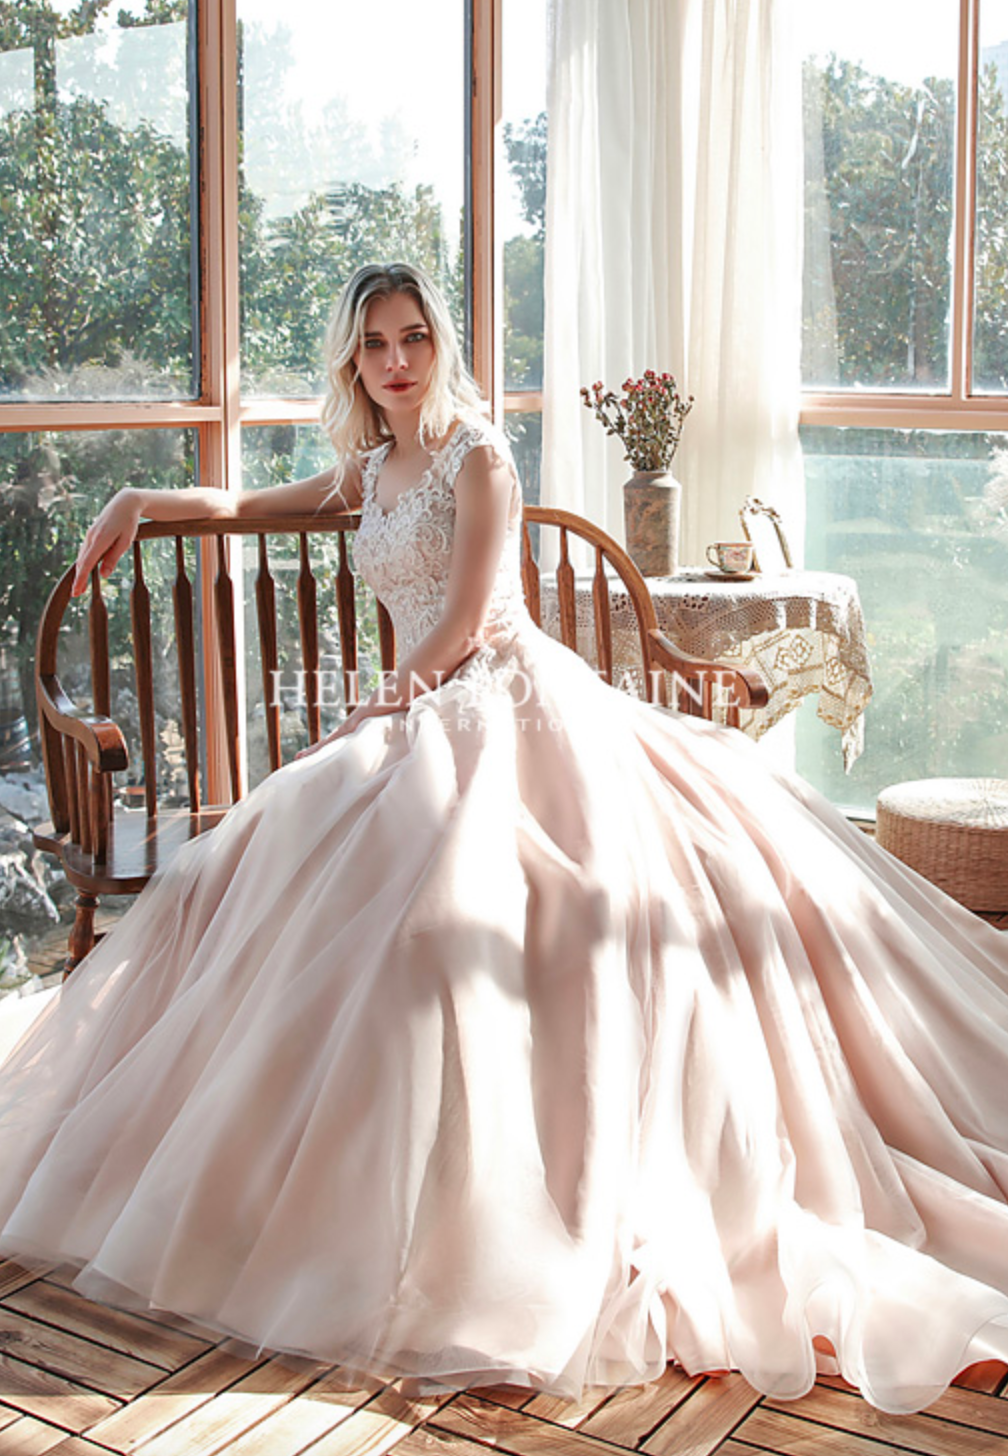 Helen Fontaine Bridal